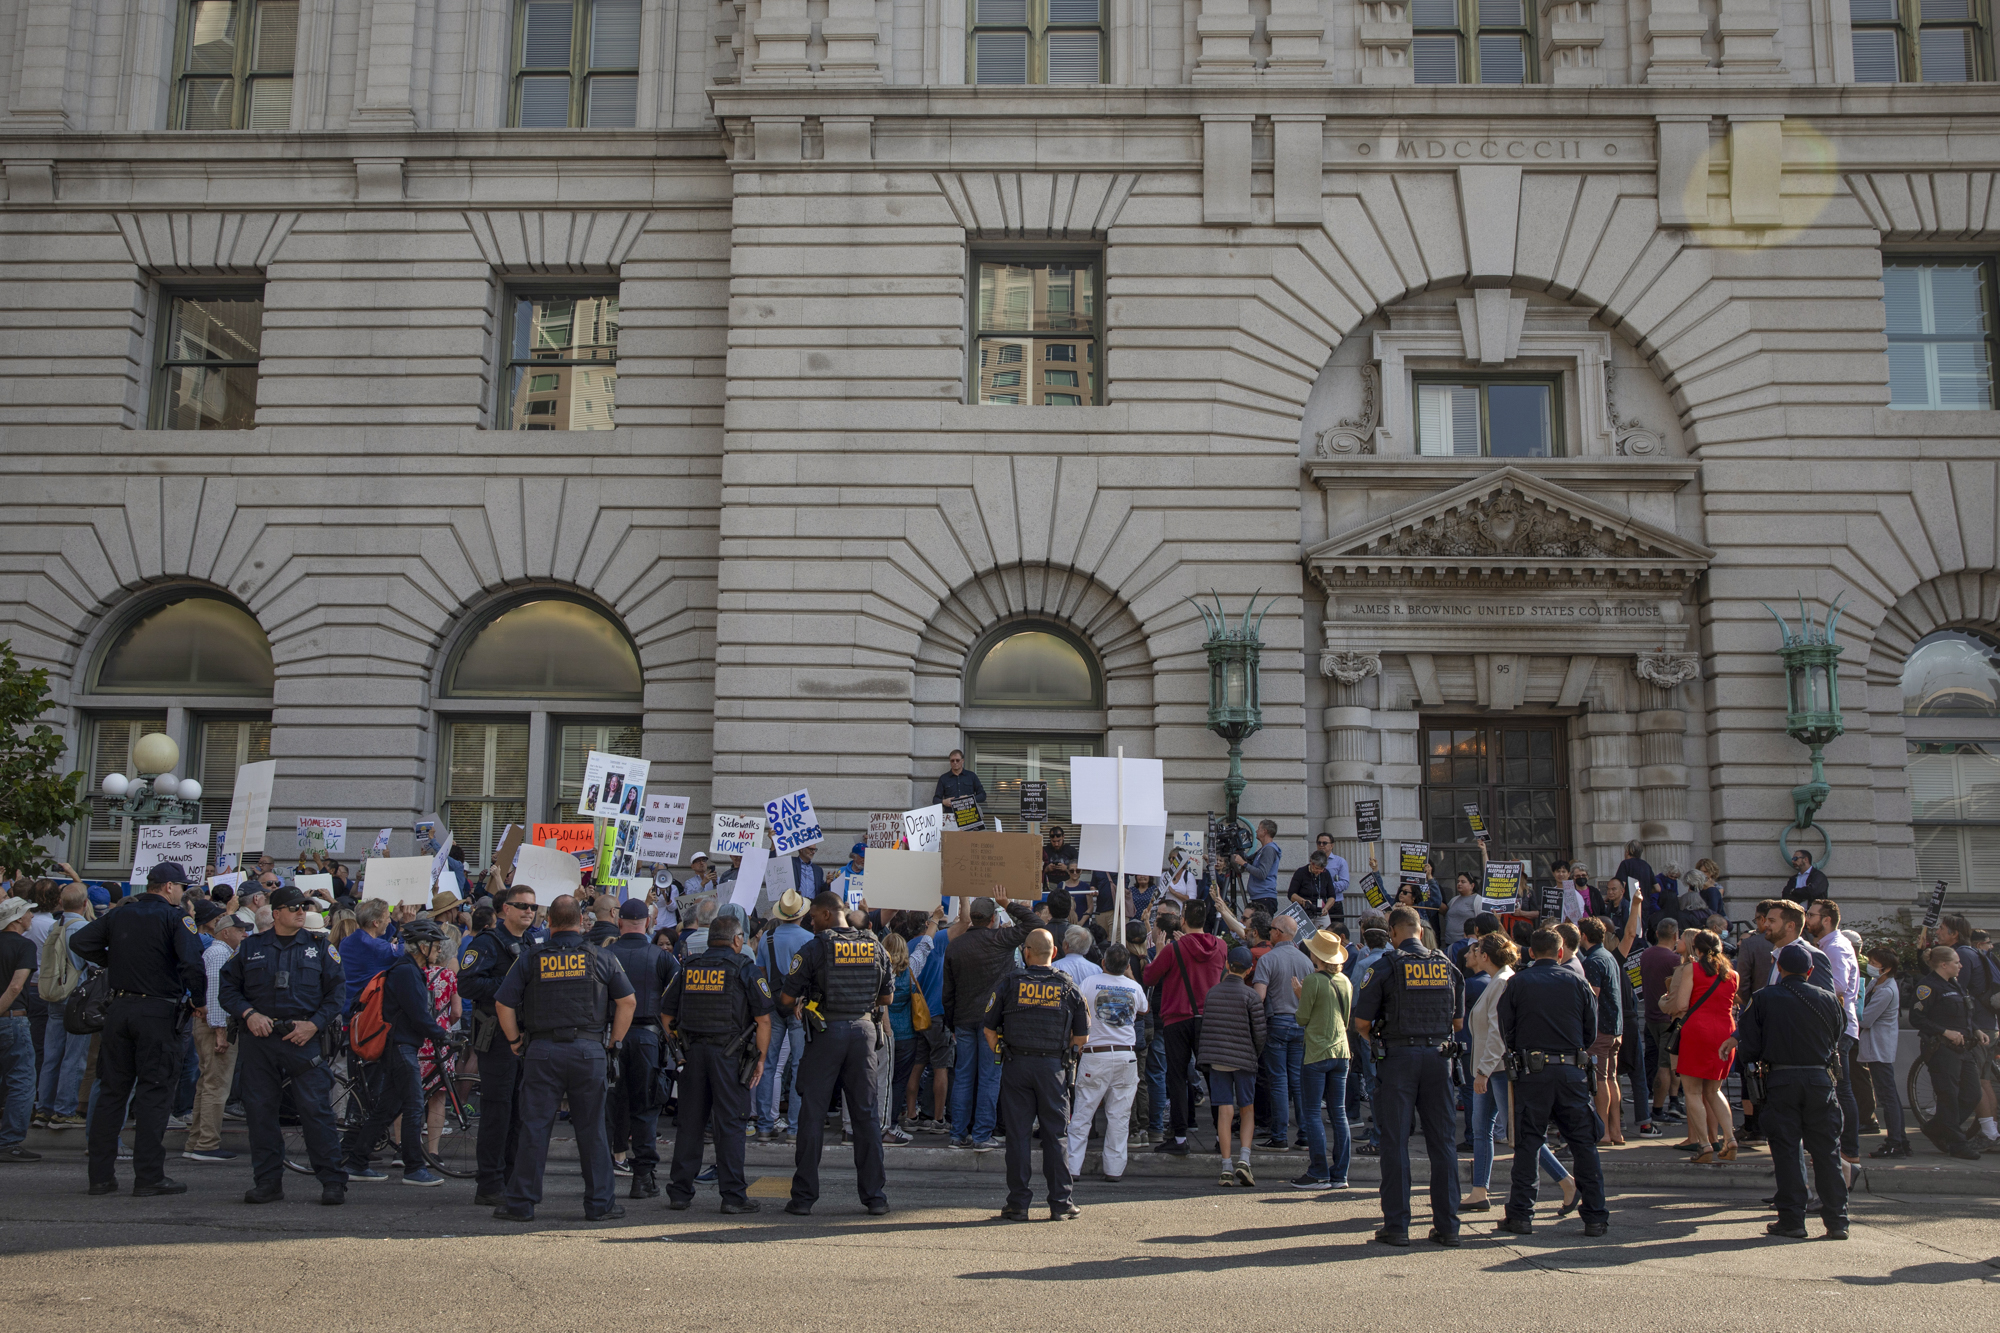 A large crowd with signs gathers in front of a large stone building. A line of police officers stands nearby.